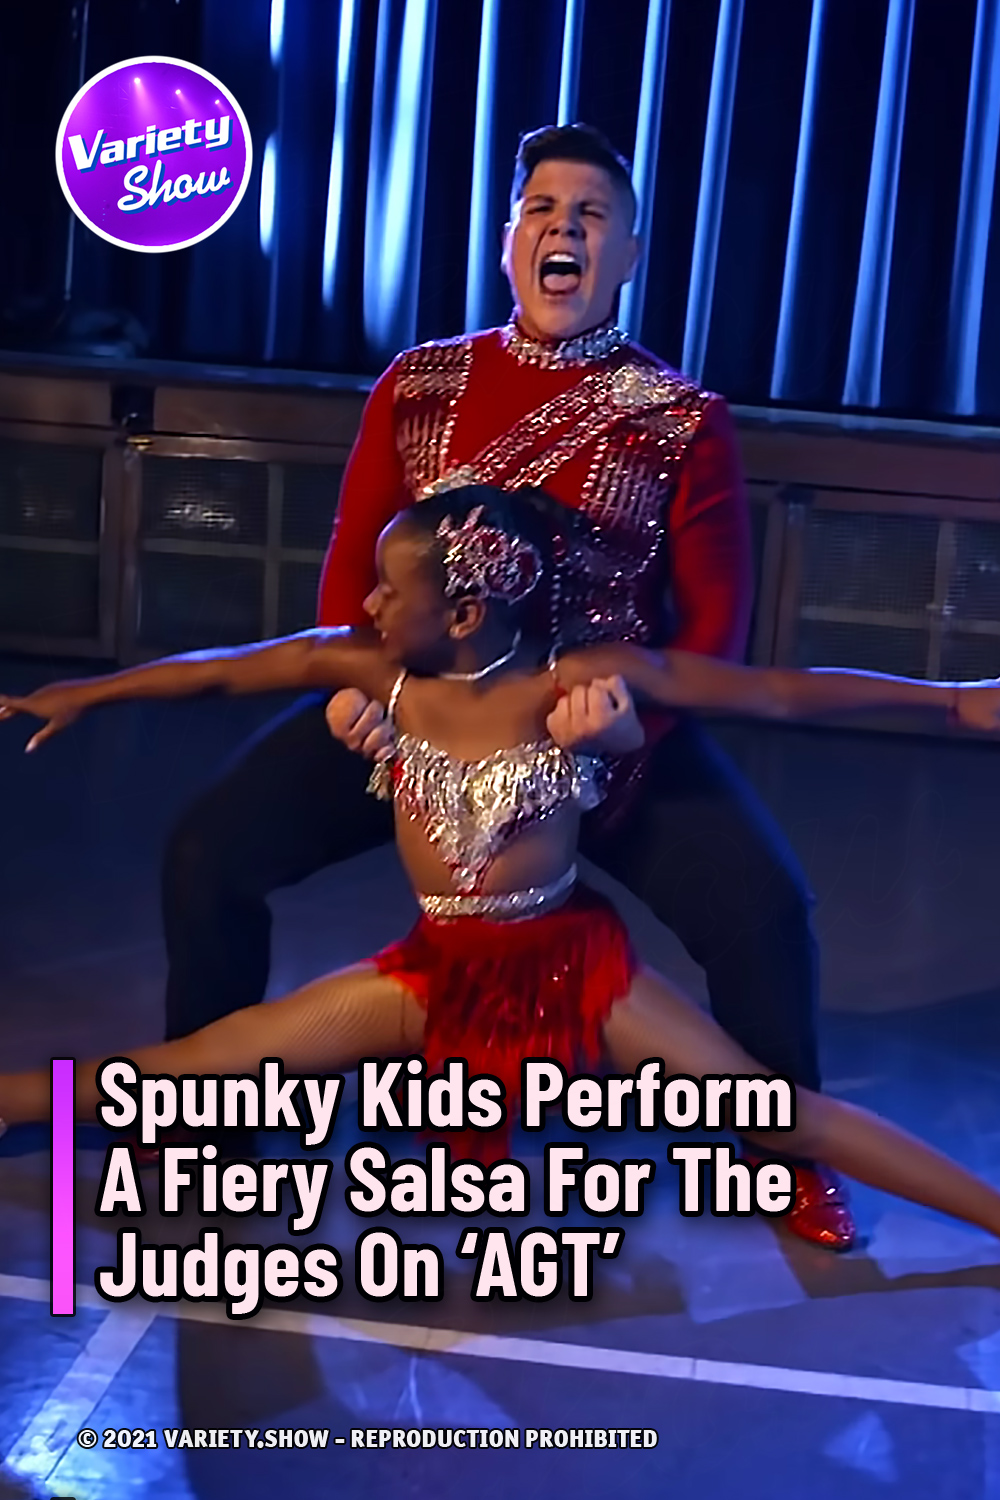 Spunky Kids Perform A Fiery Salsa For The Judges On ‘AGT’